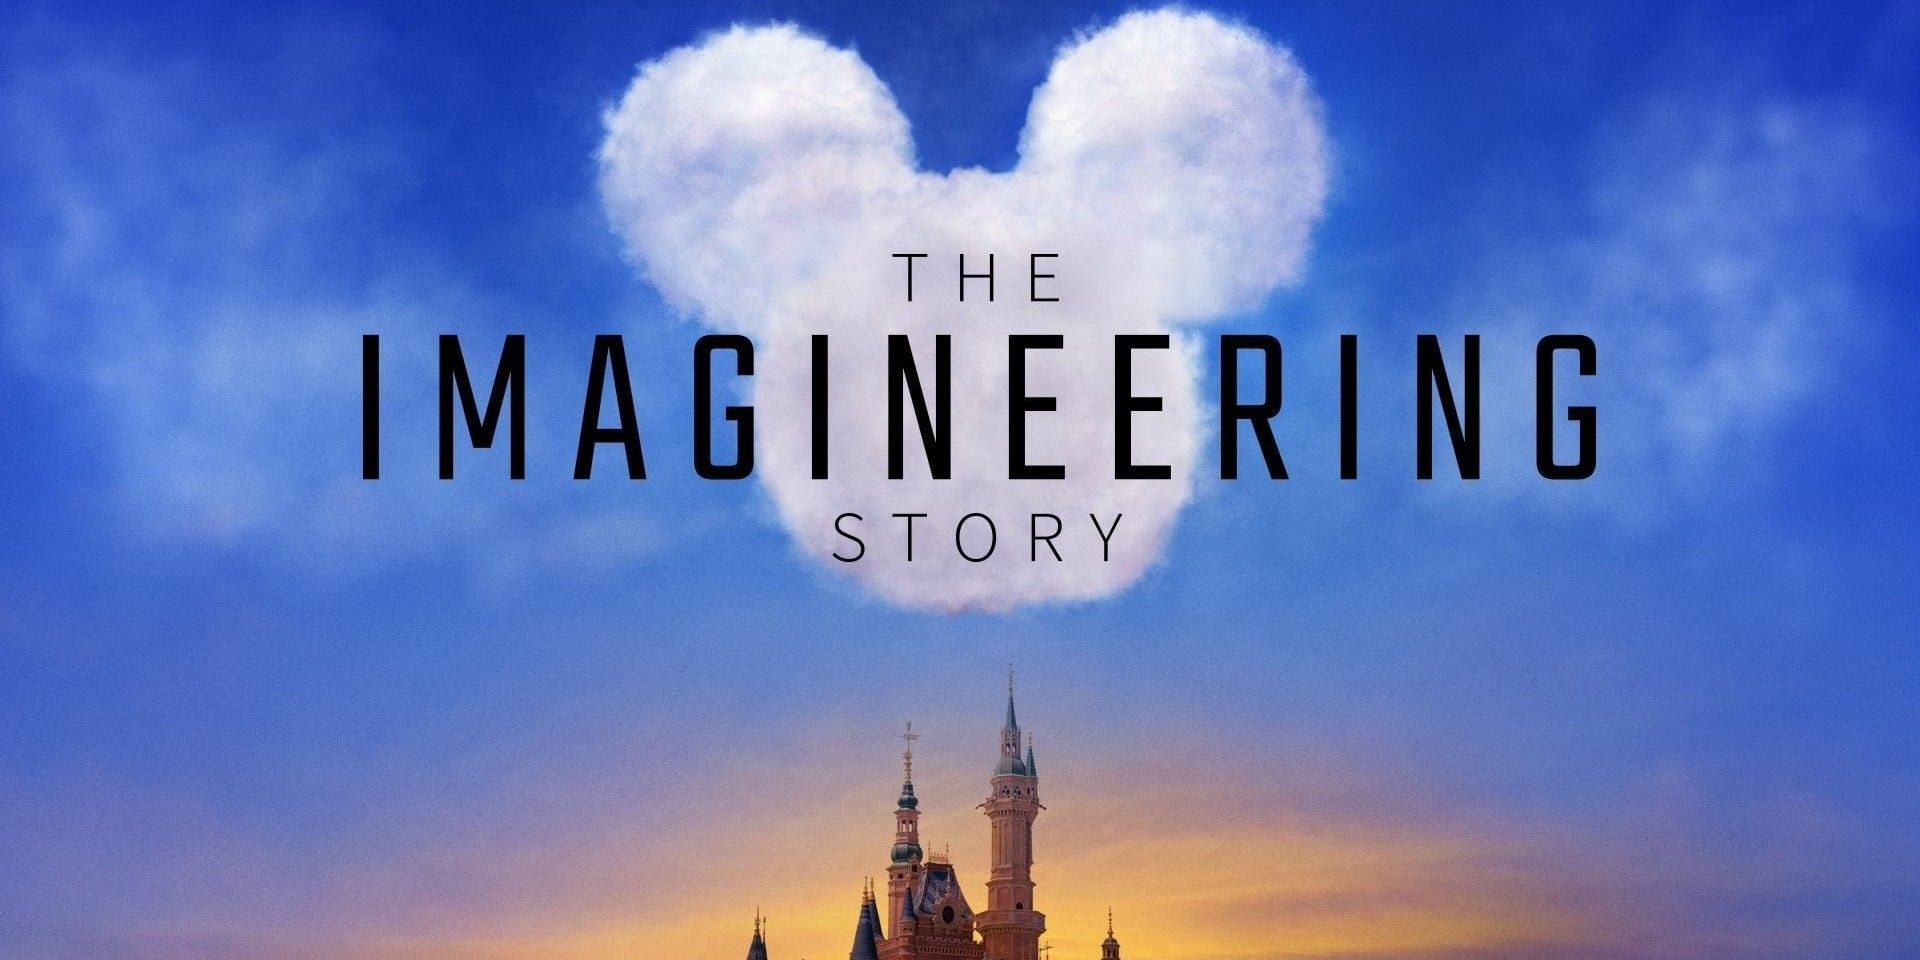 Poster for The Imagineering Story featuring a cloud in the shape of Mickey